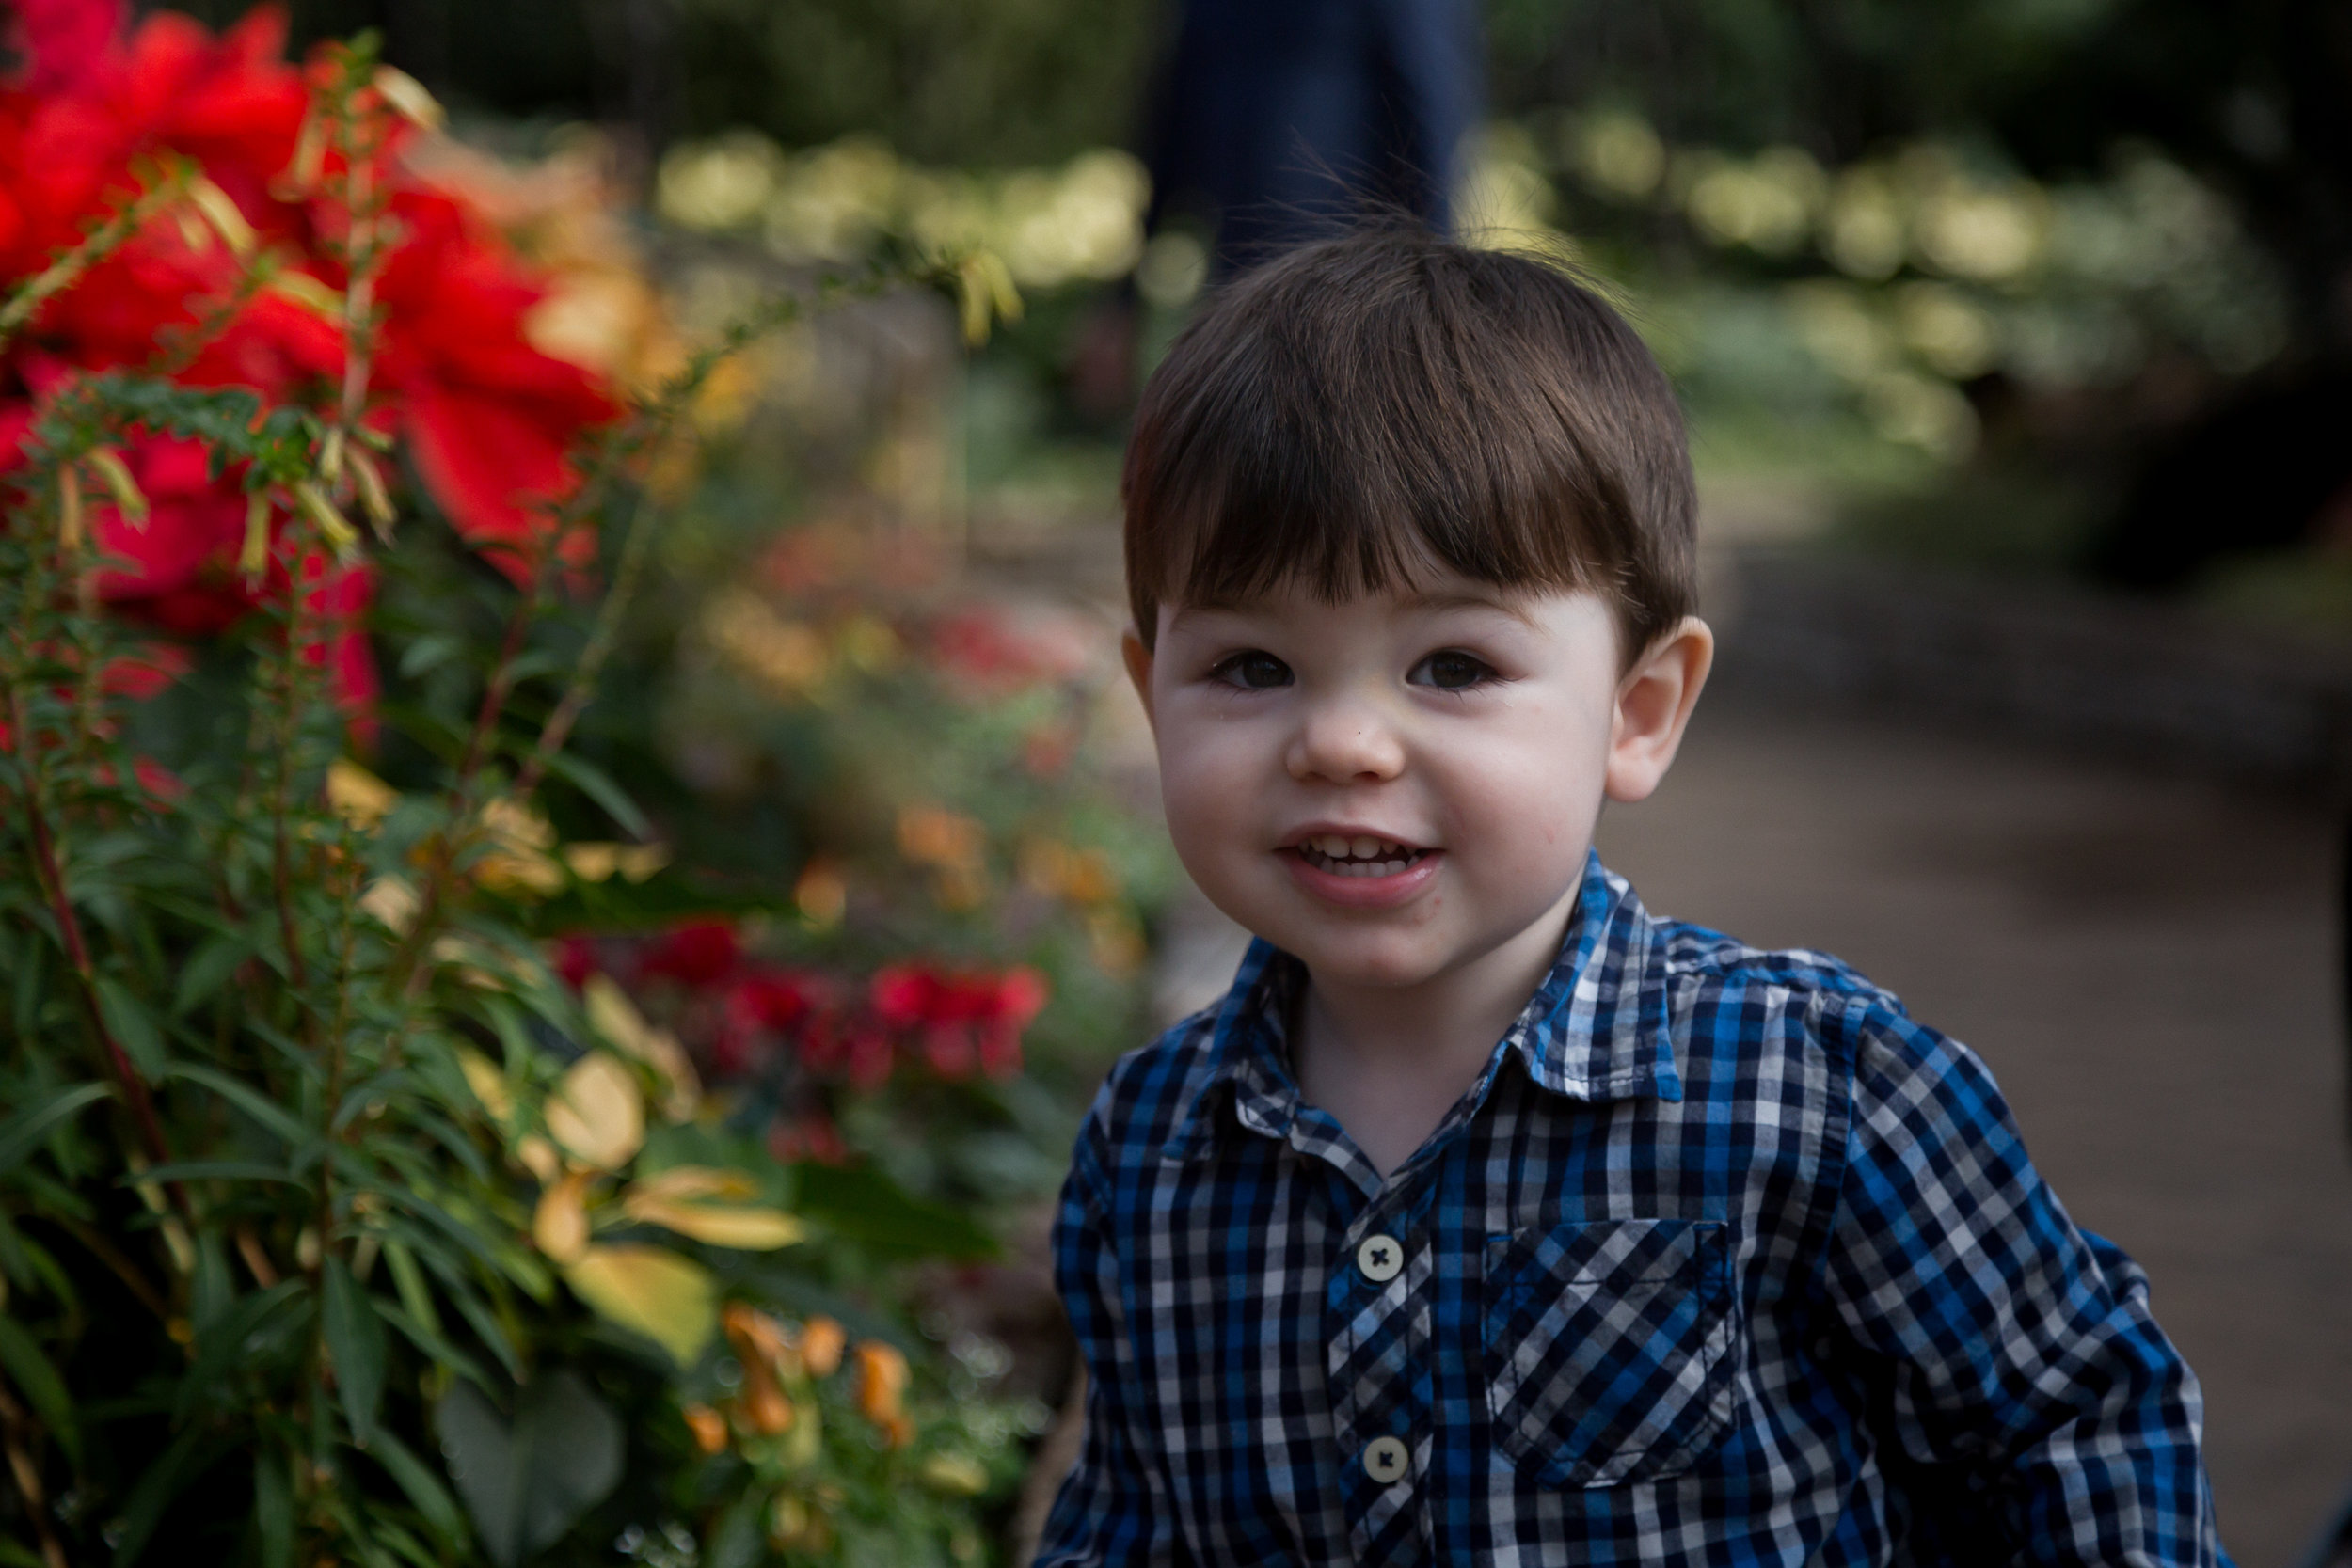 Chicago_Photographer_Garfield_Park_Conservatory_Family_Holiday-6.jpg